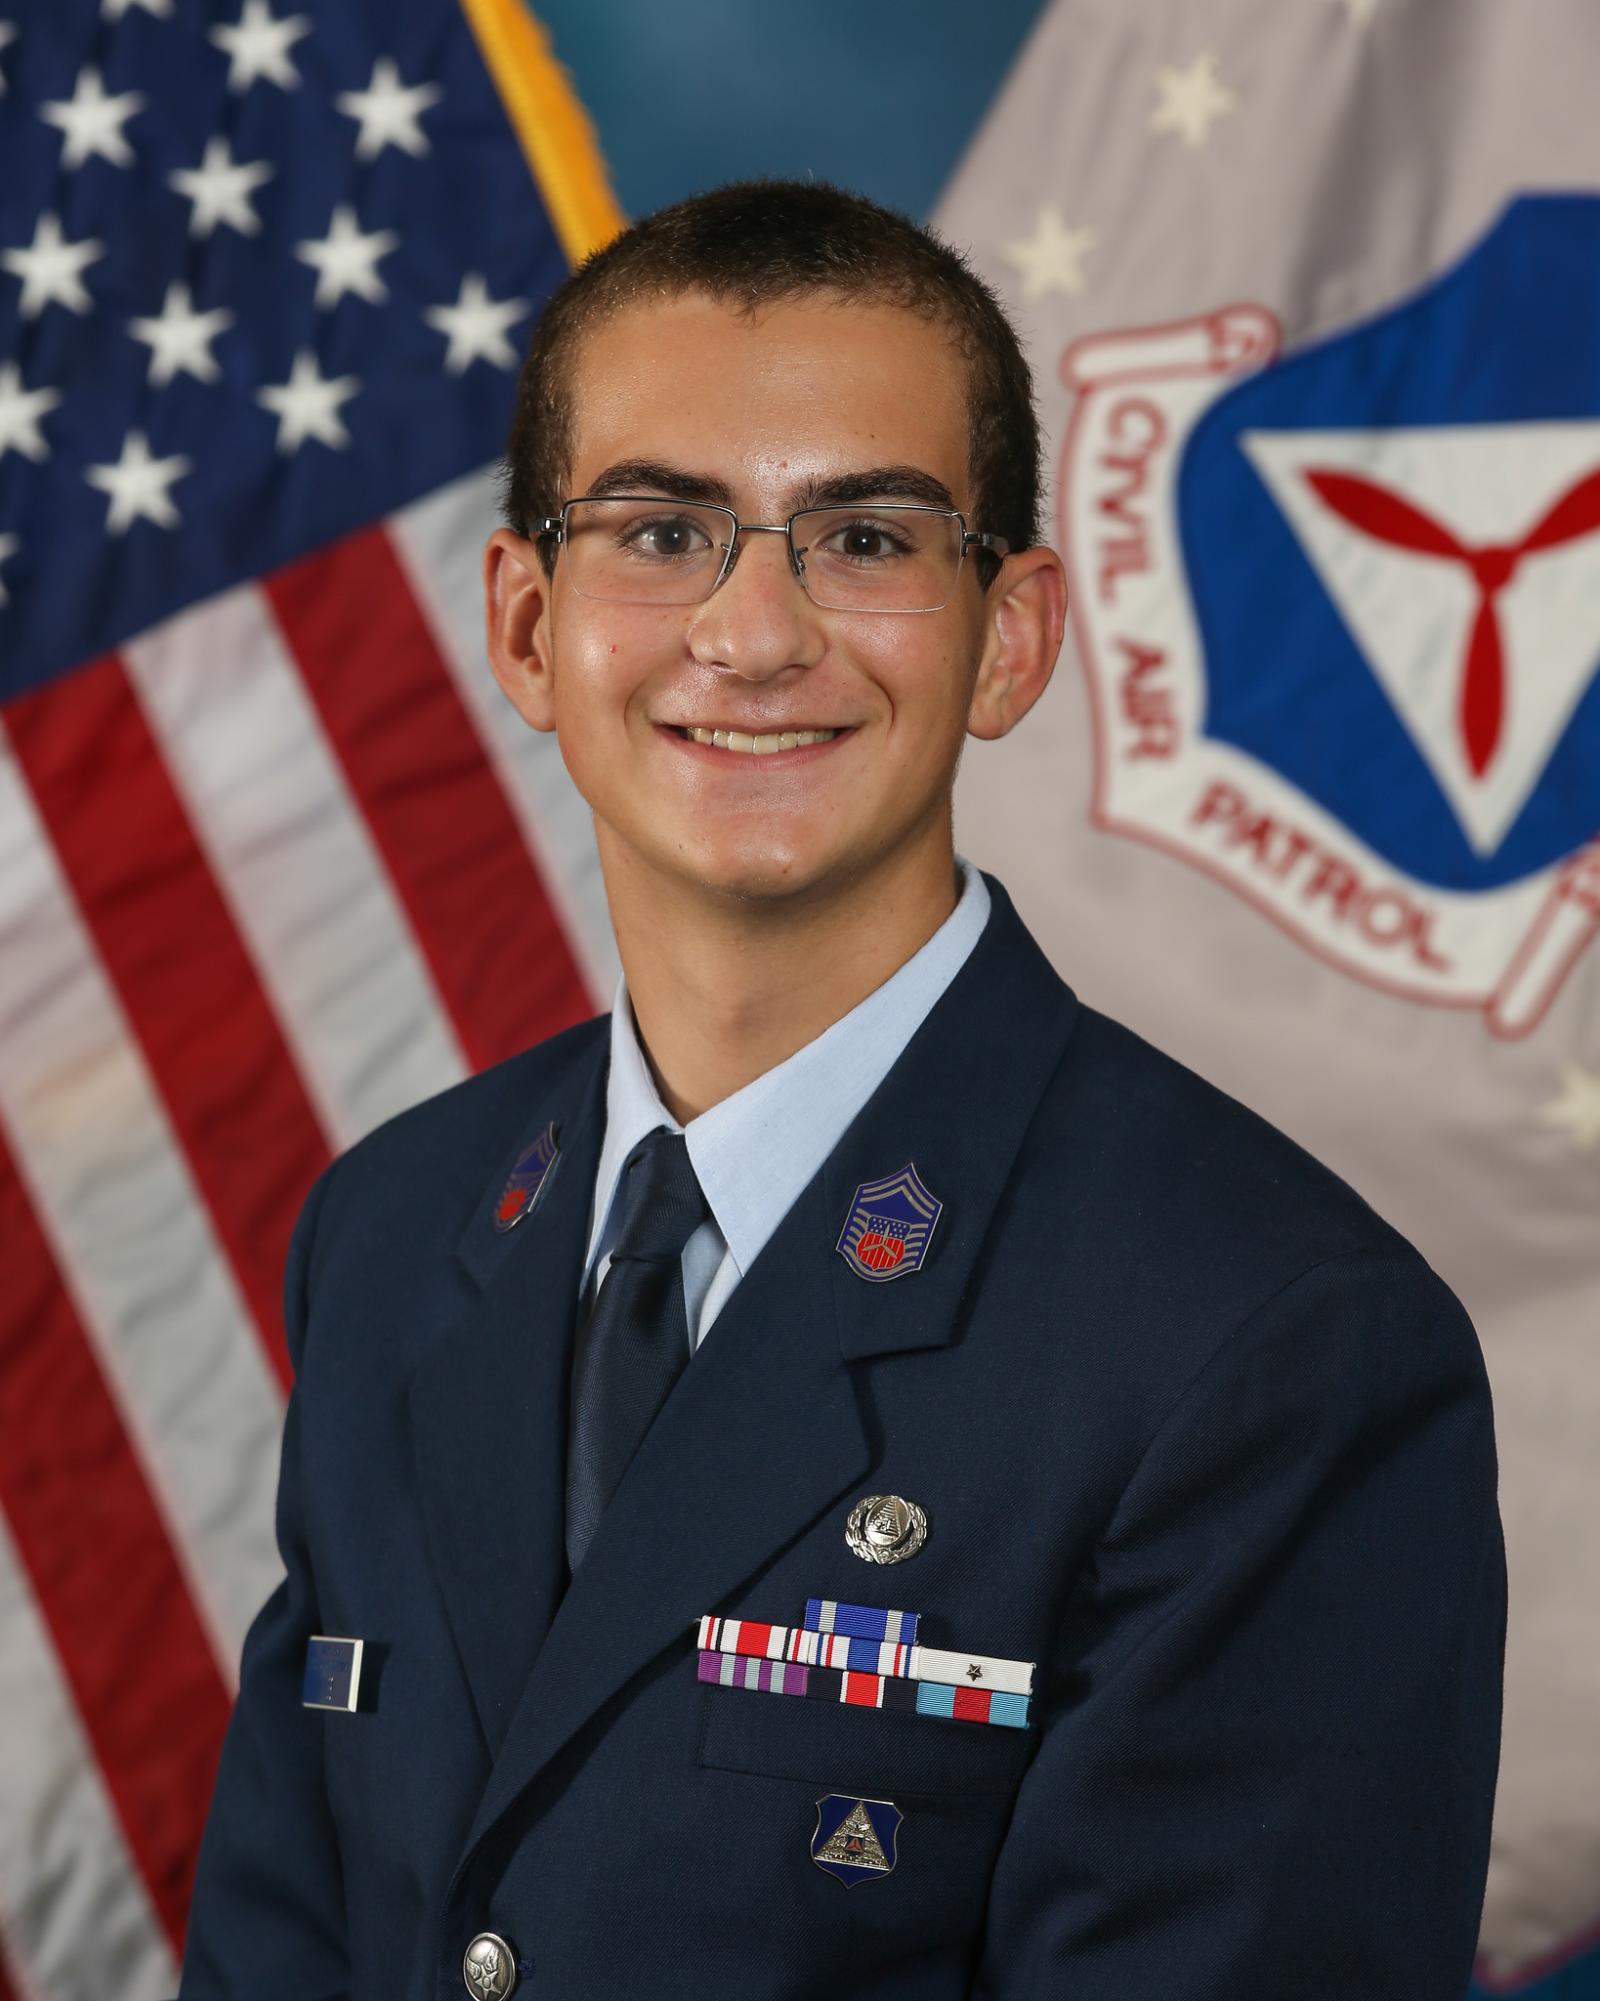 Aidan Kinsey, Civil Air Patrol Cadet, smiles in a suit, featuring many medals of honor